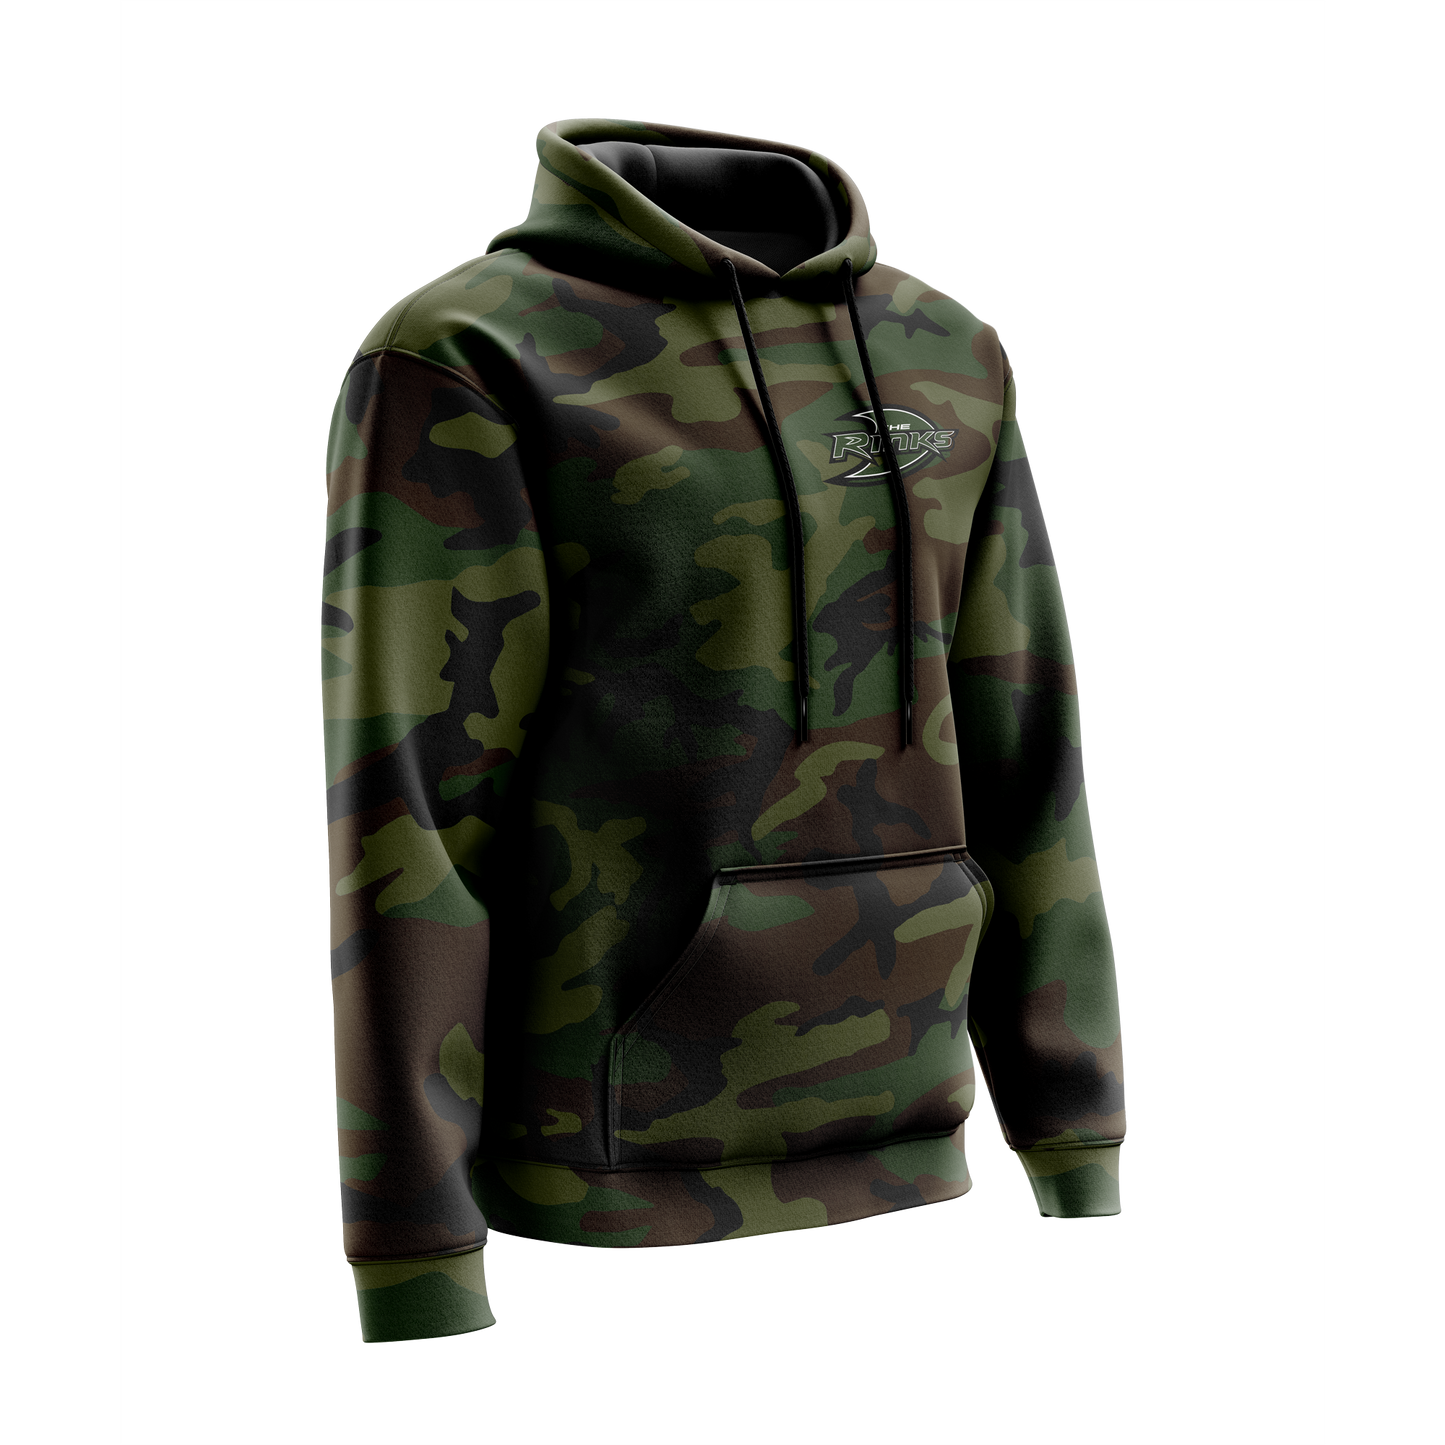 The Rinks™ Camo Pullover Hoodie